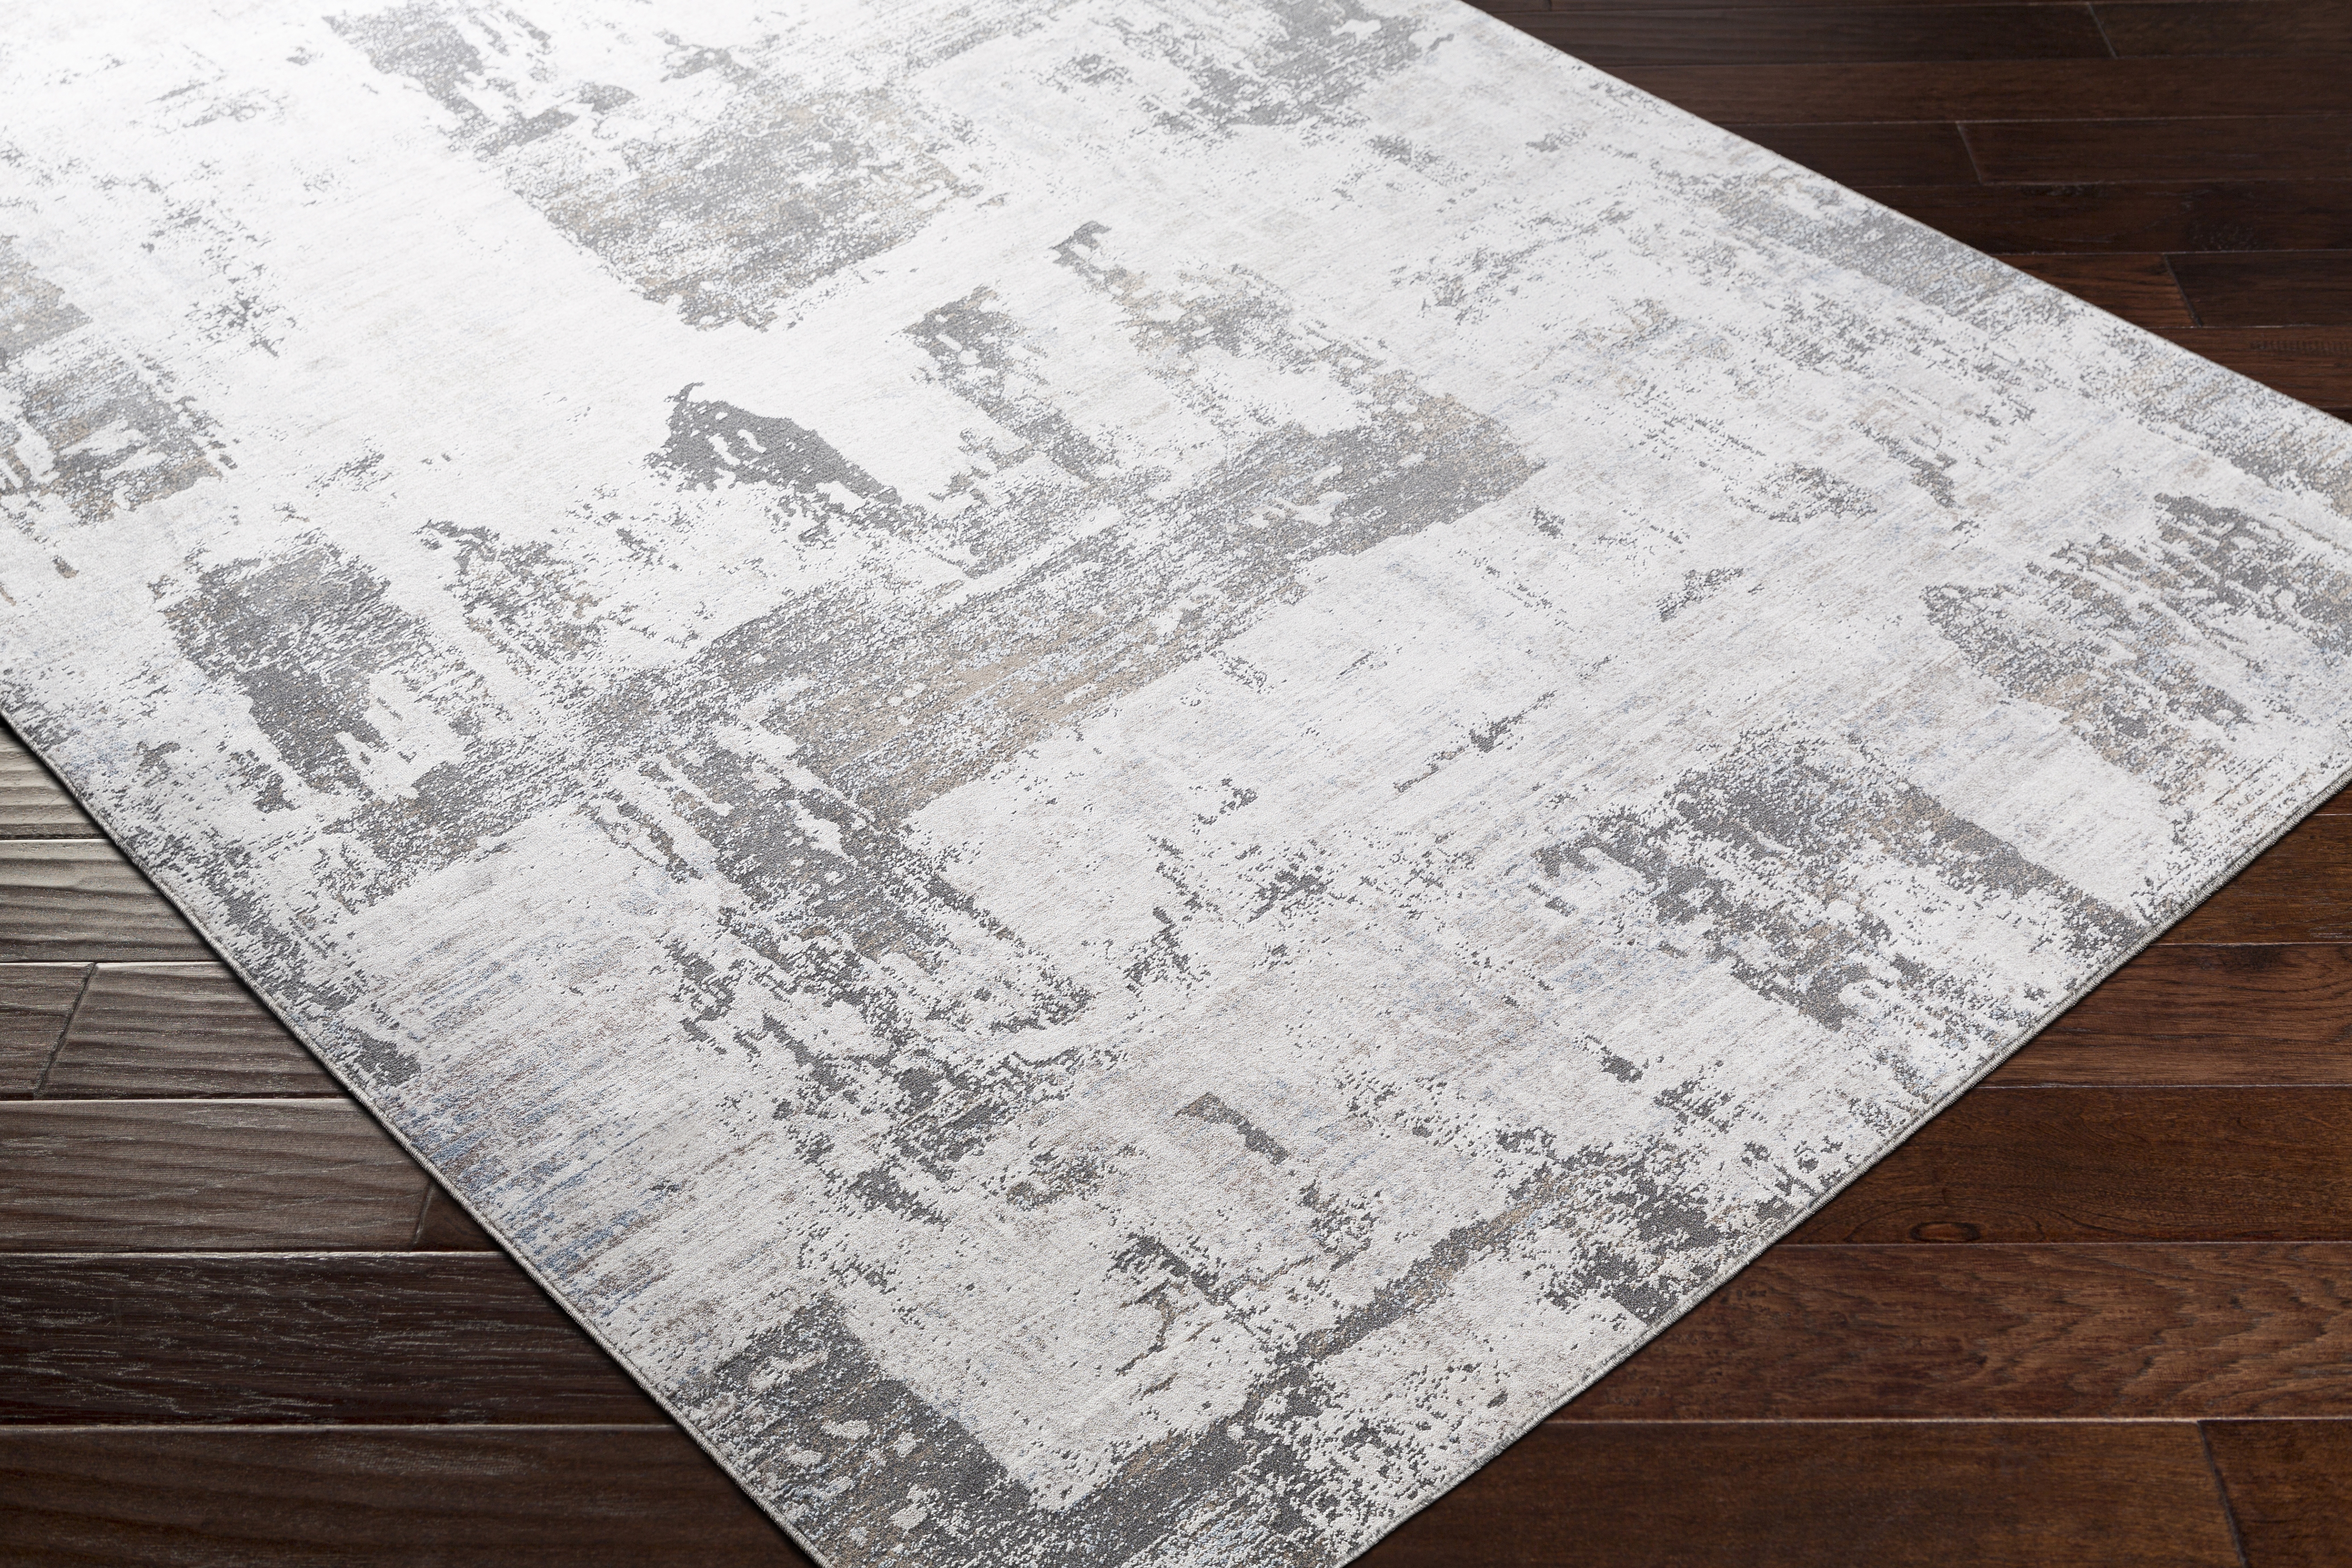 Couture Rug, 8'10" x 12' - Image 2